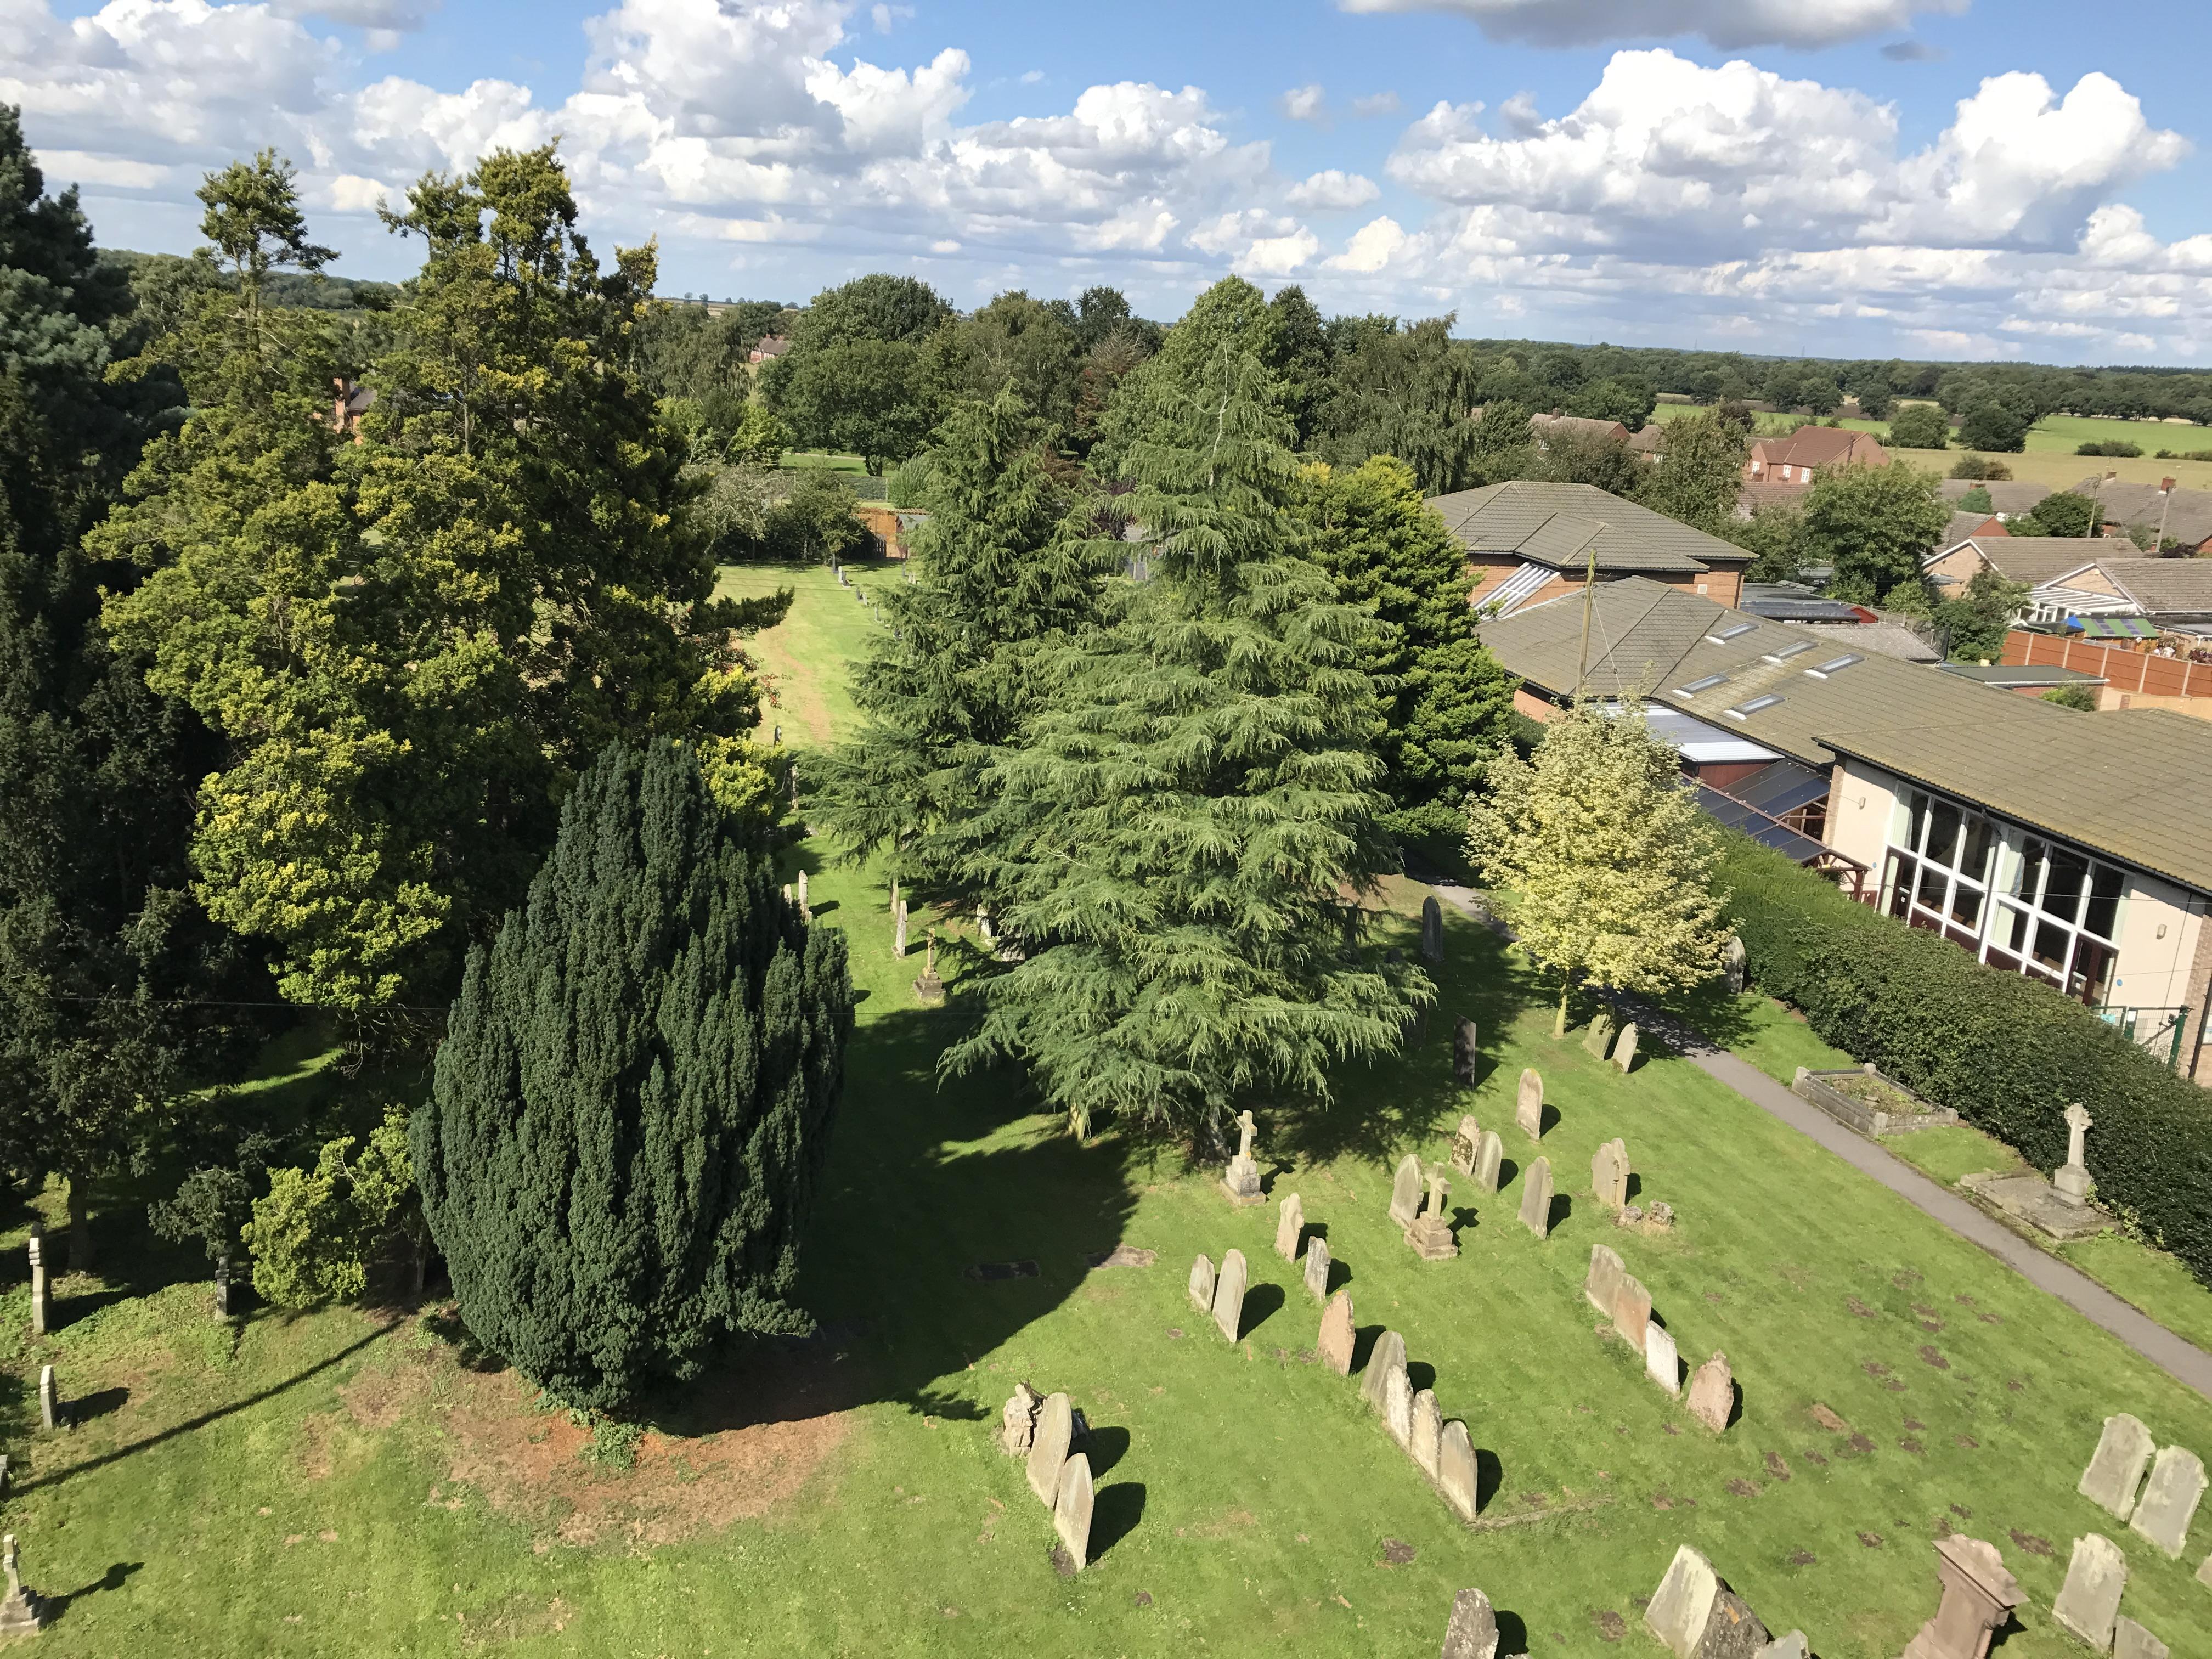 View from All Saints Church tower - north